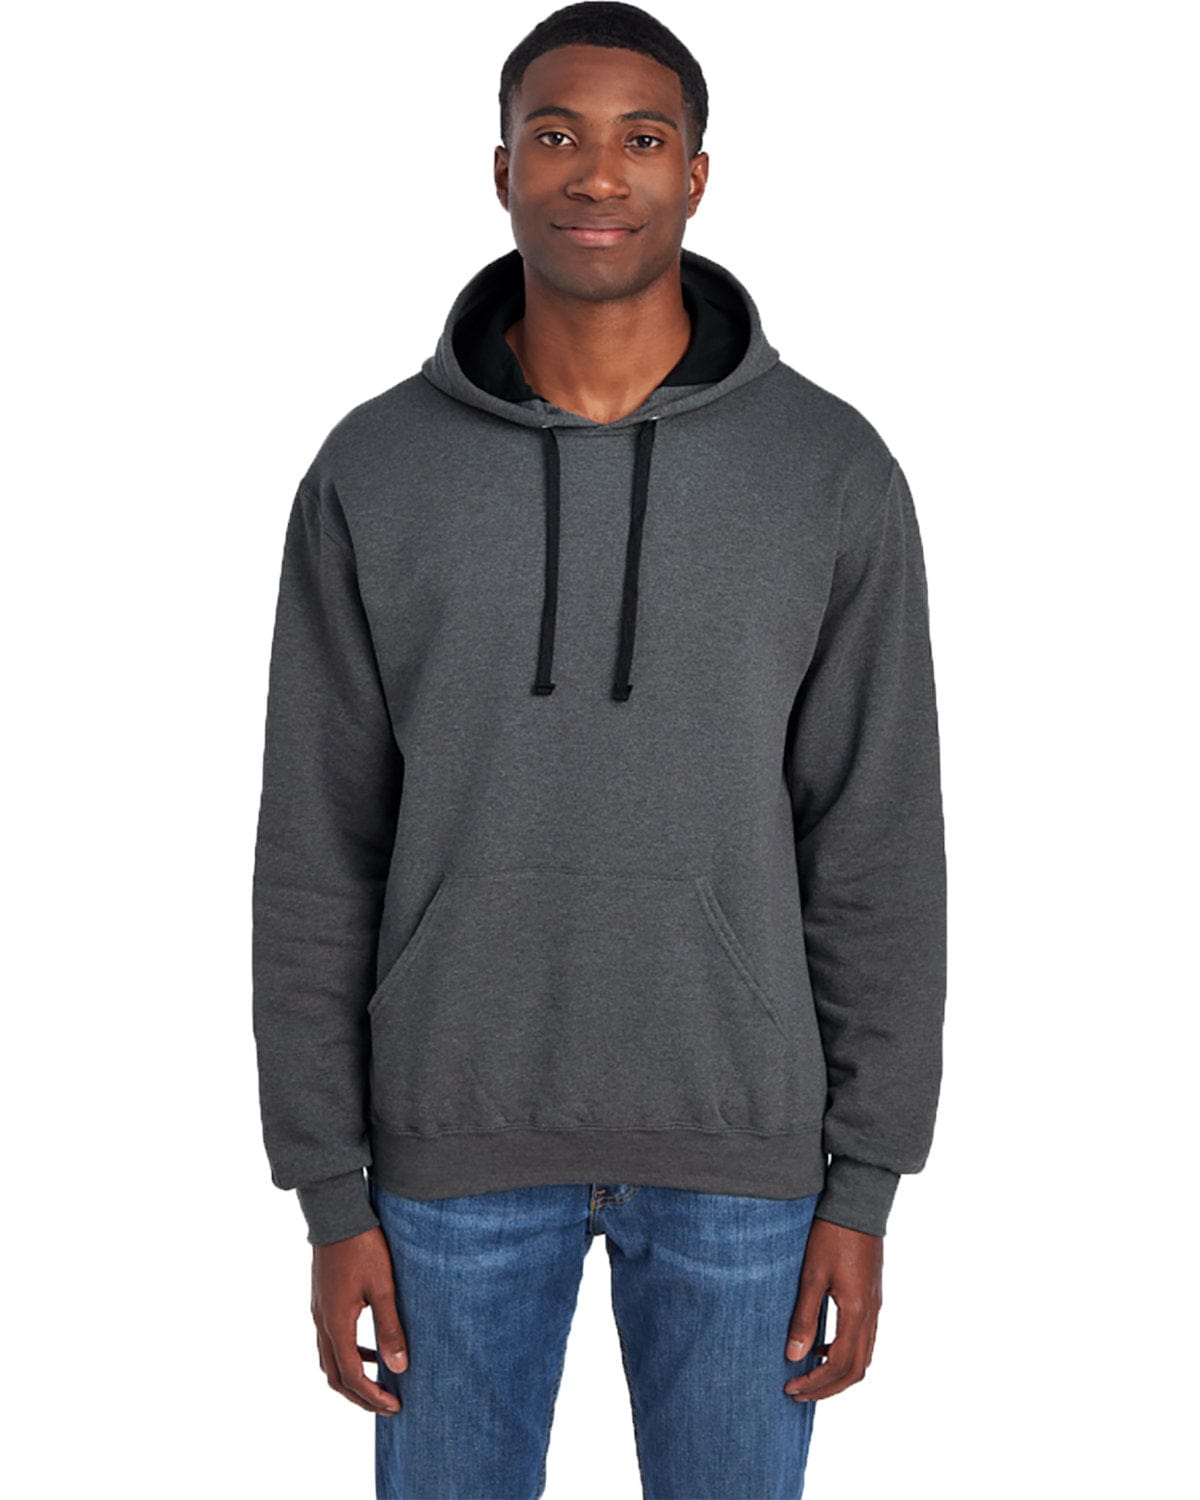 Fruit of the Loom Adult Supercotton™ Pullover Hooded Sweatshirt